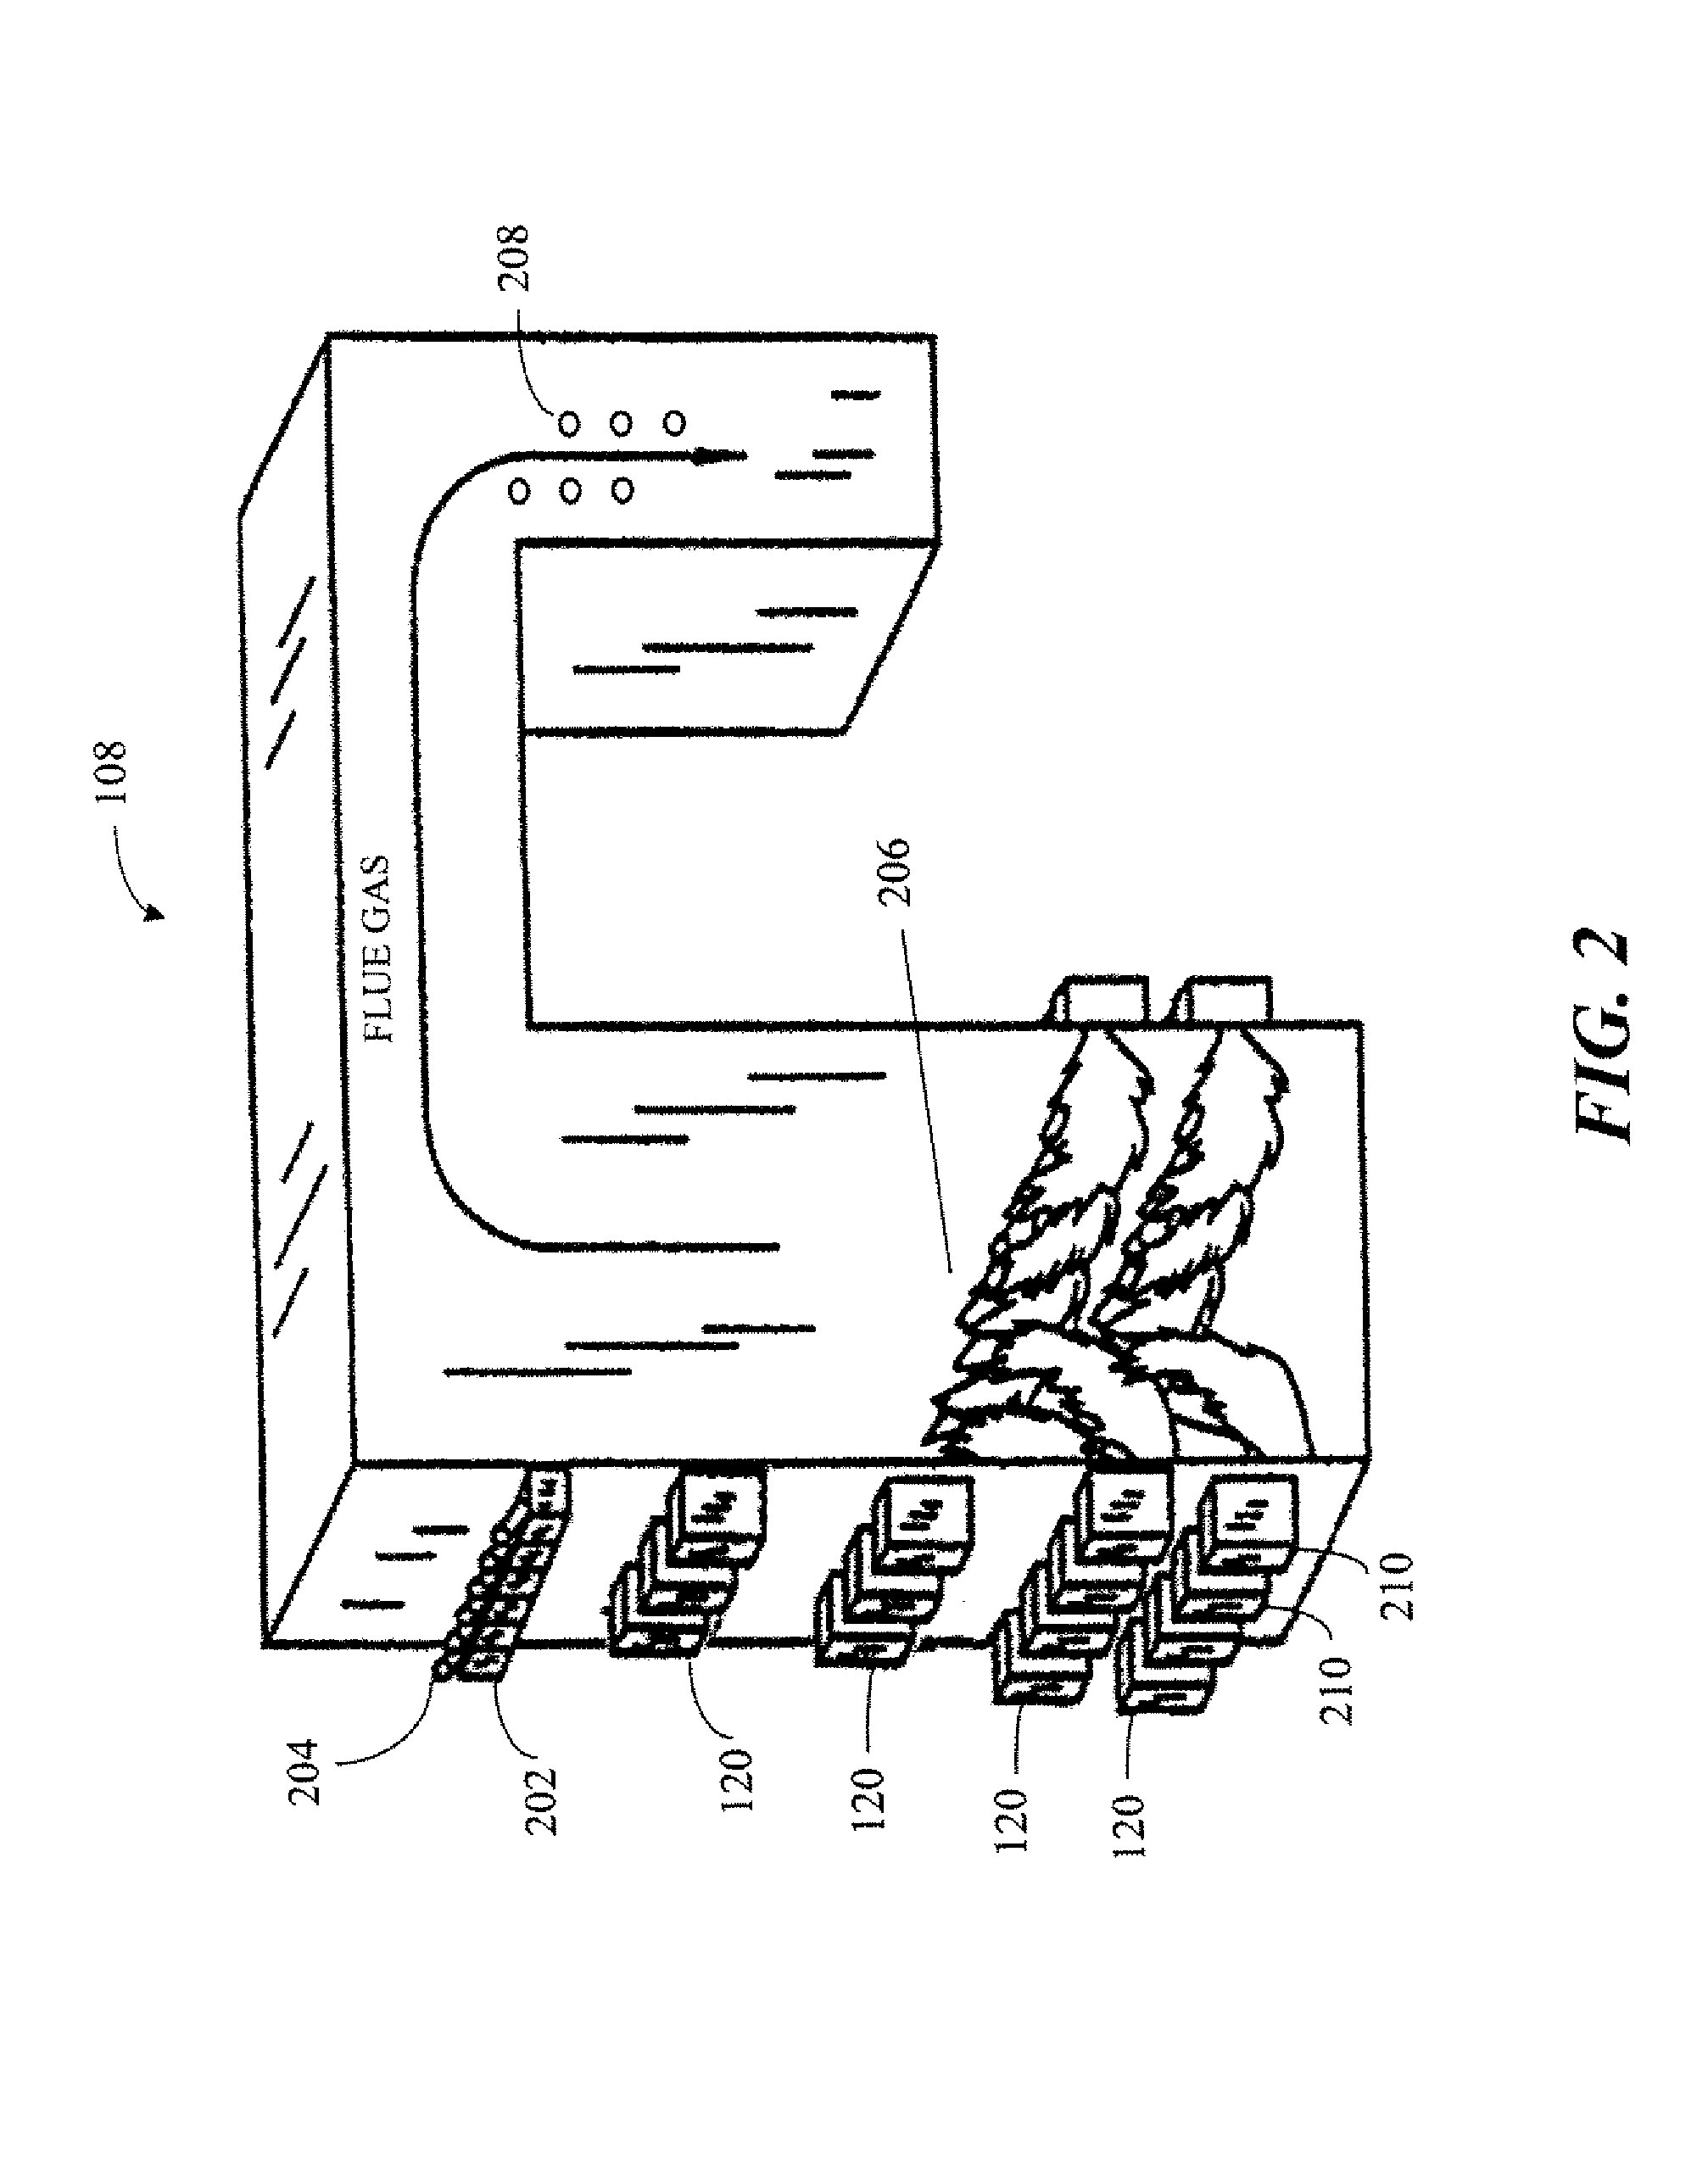 Systems and methods for multi-level optimizing control systems for boilers